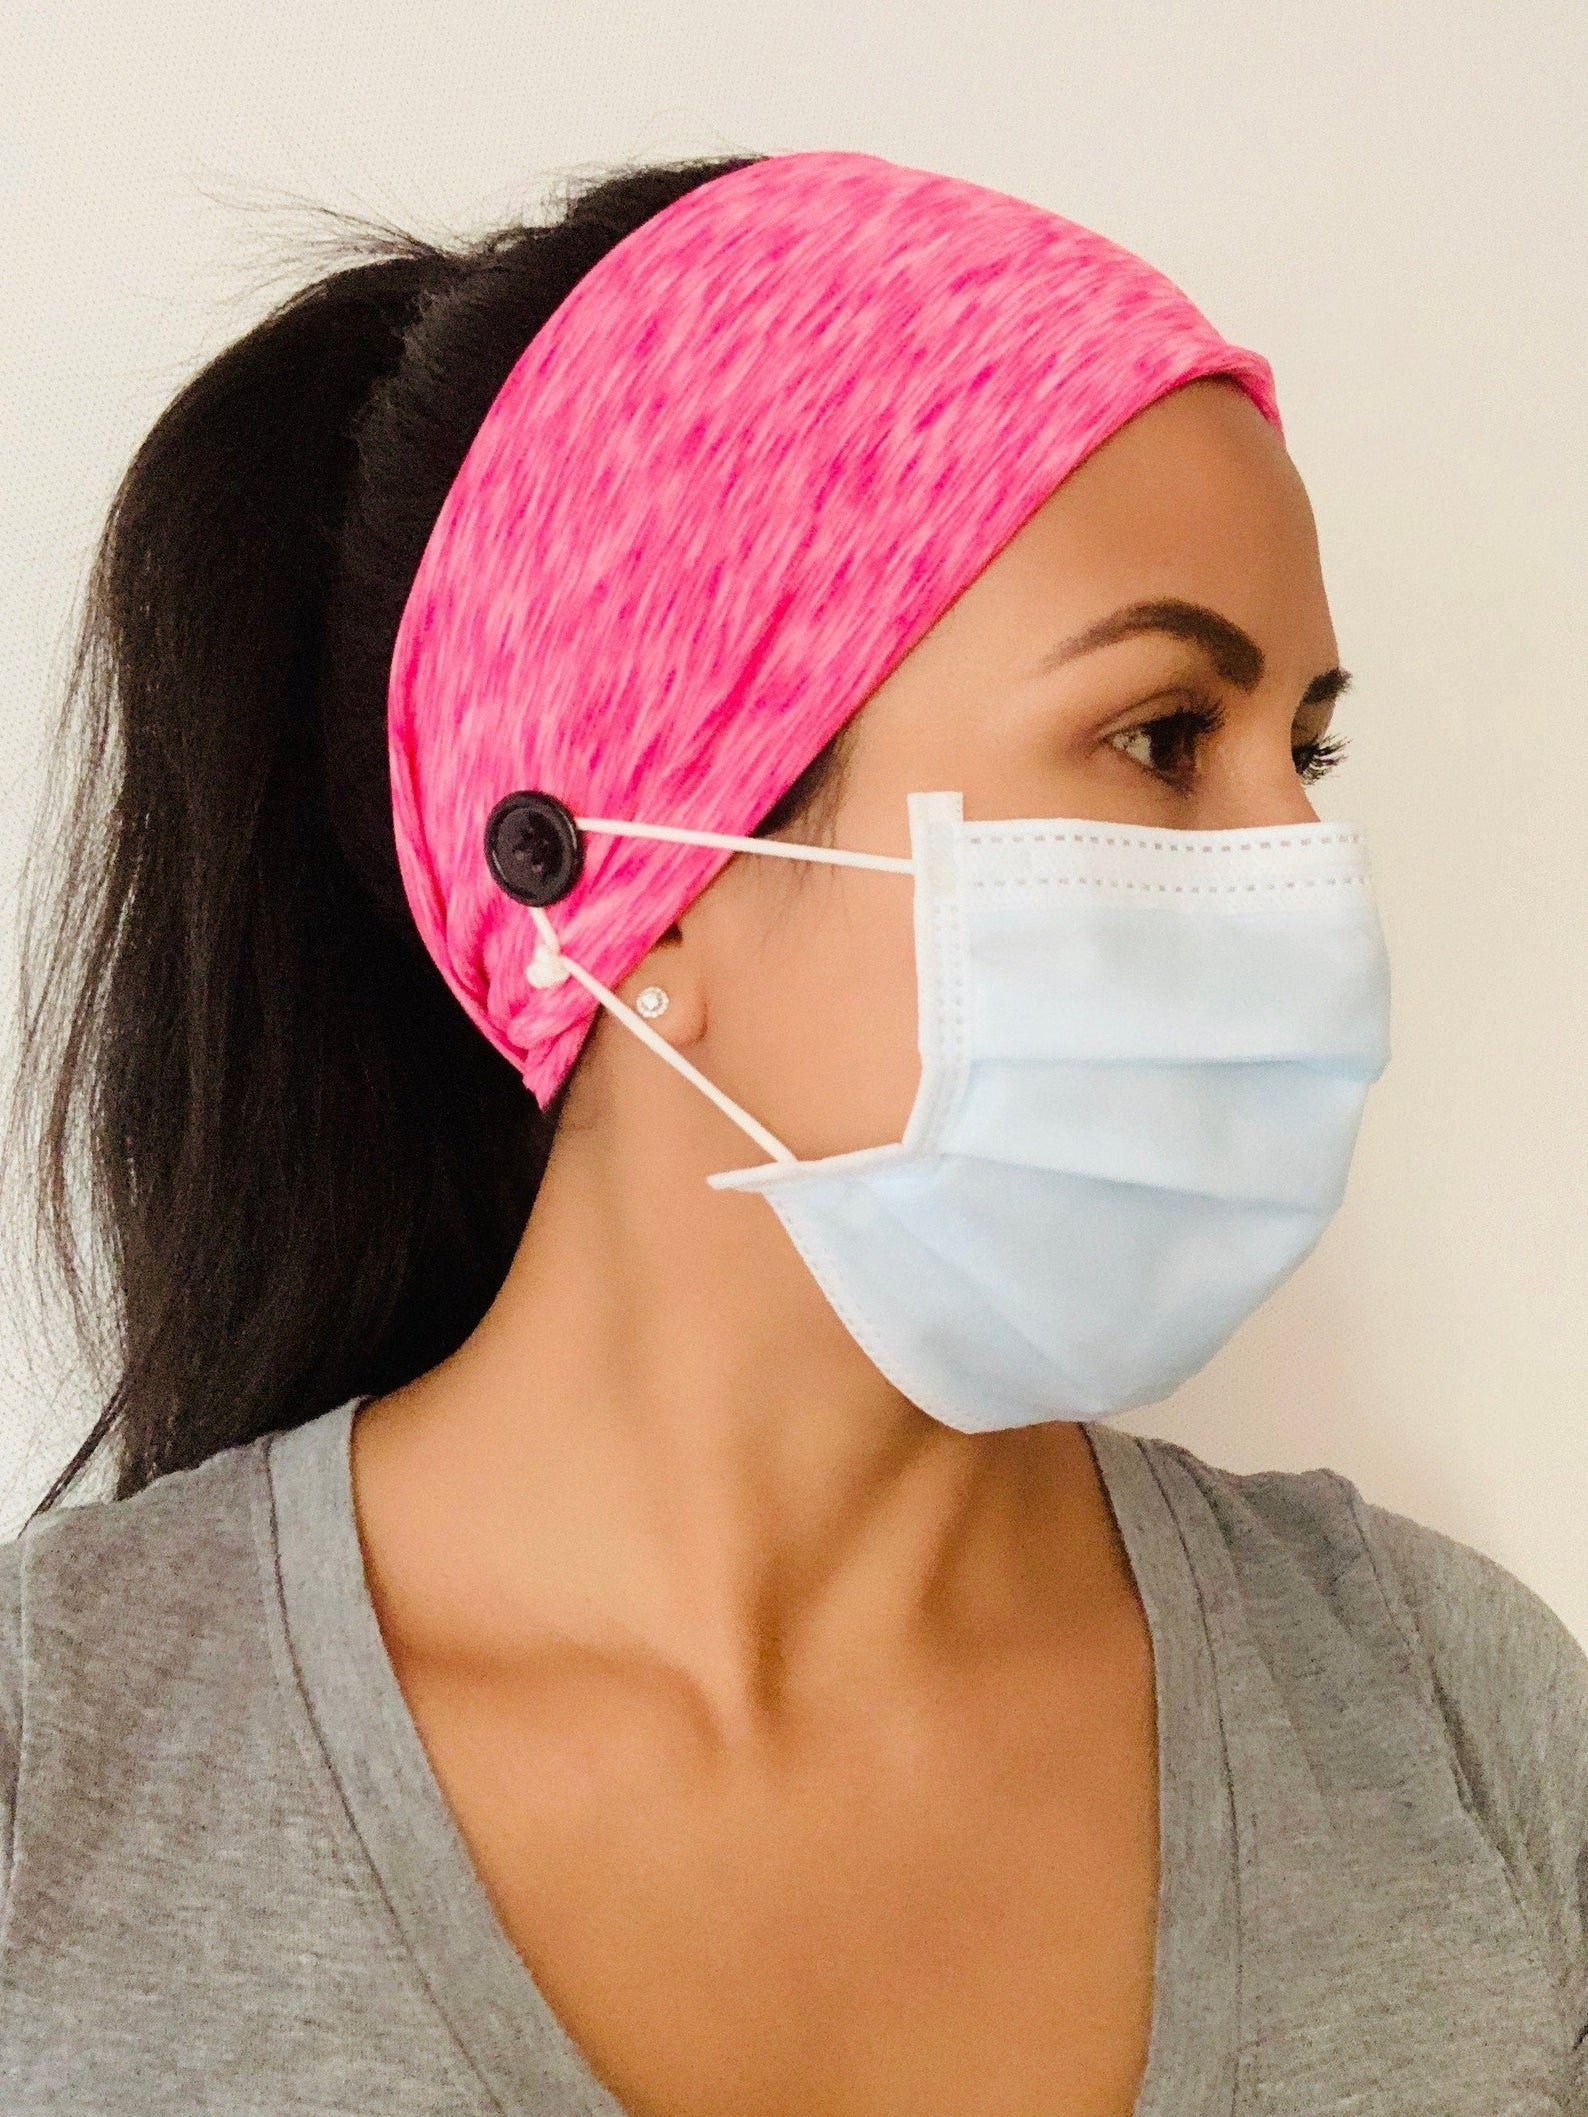 Model wearing a pink over the ear headband with a button on the side for attaching a mask strap 